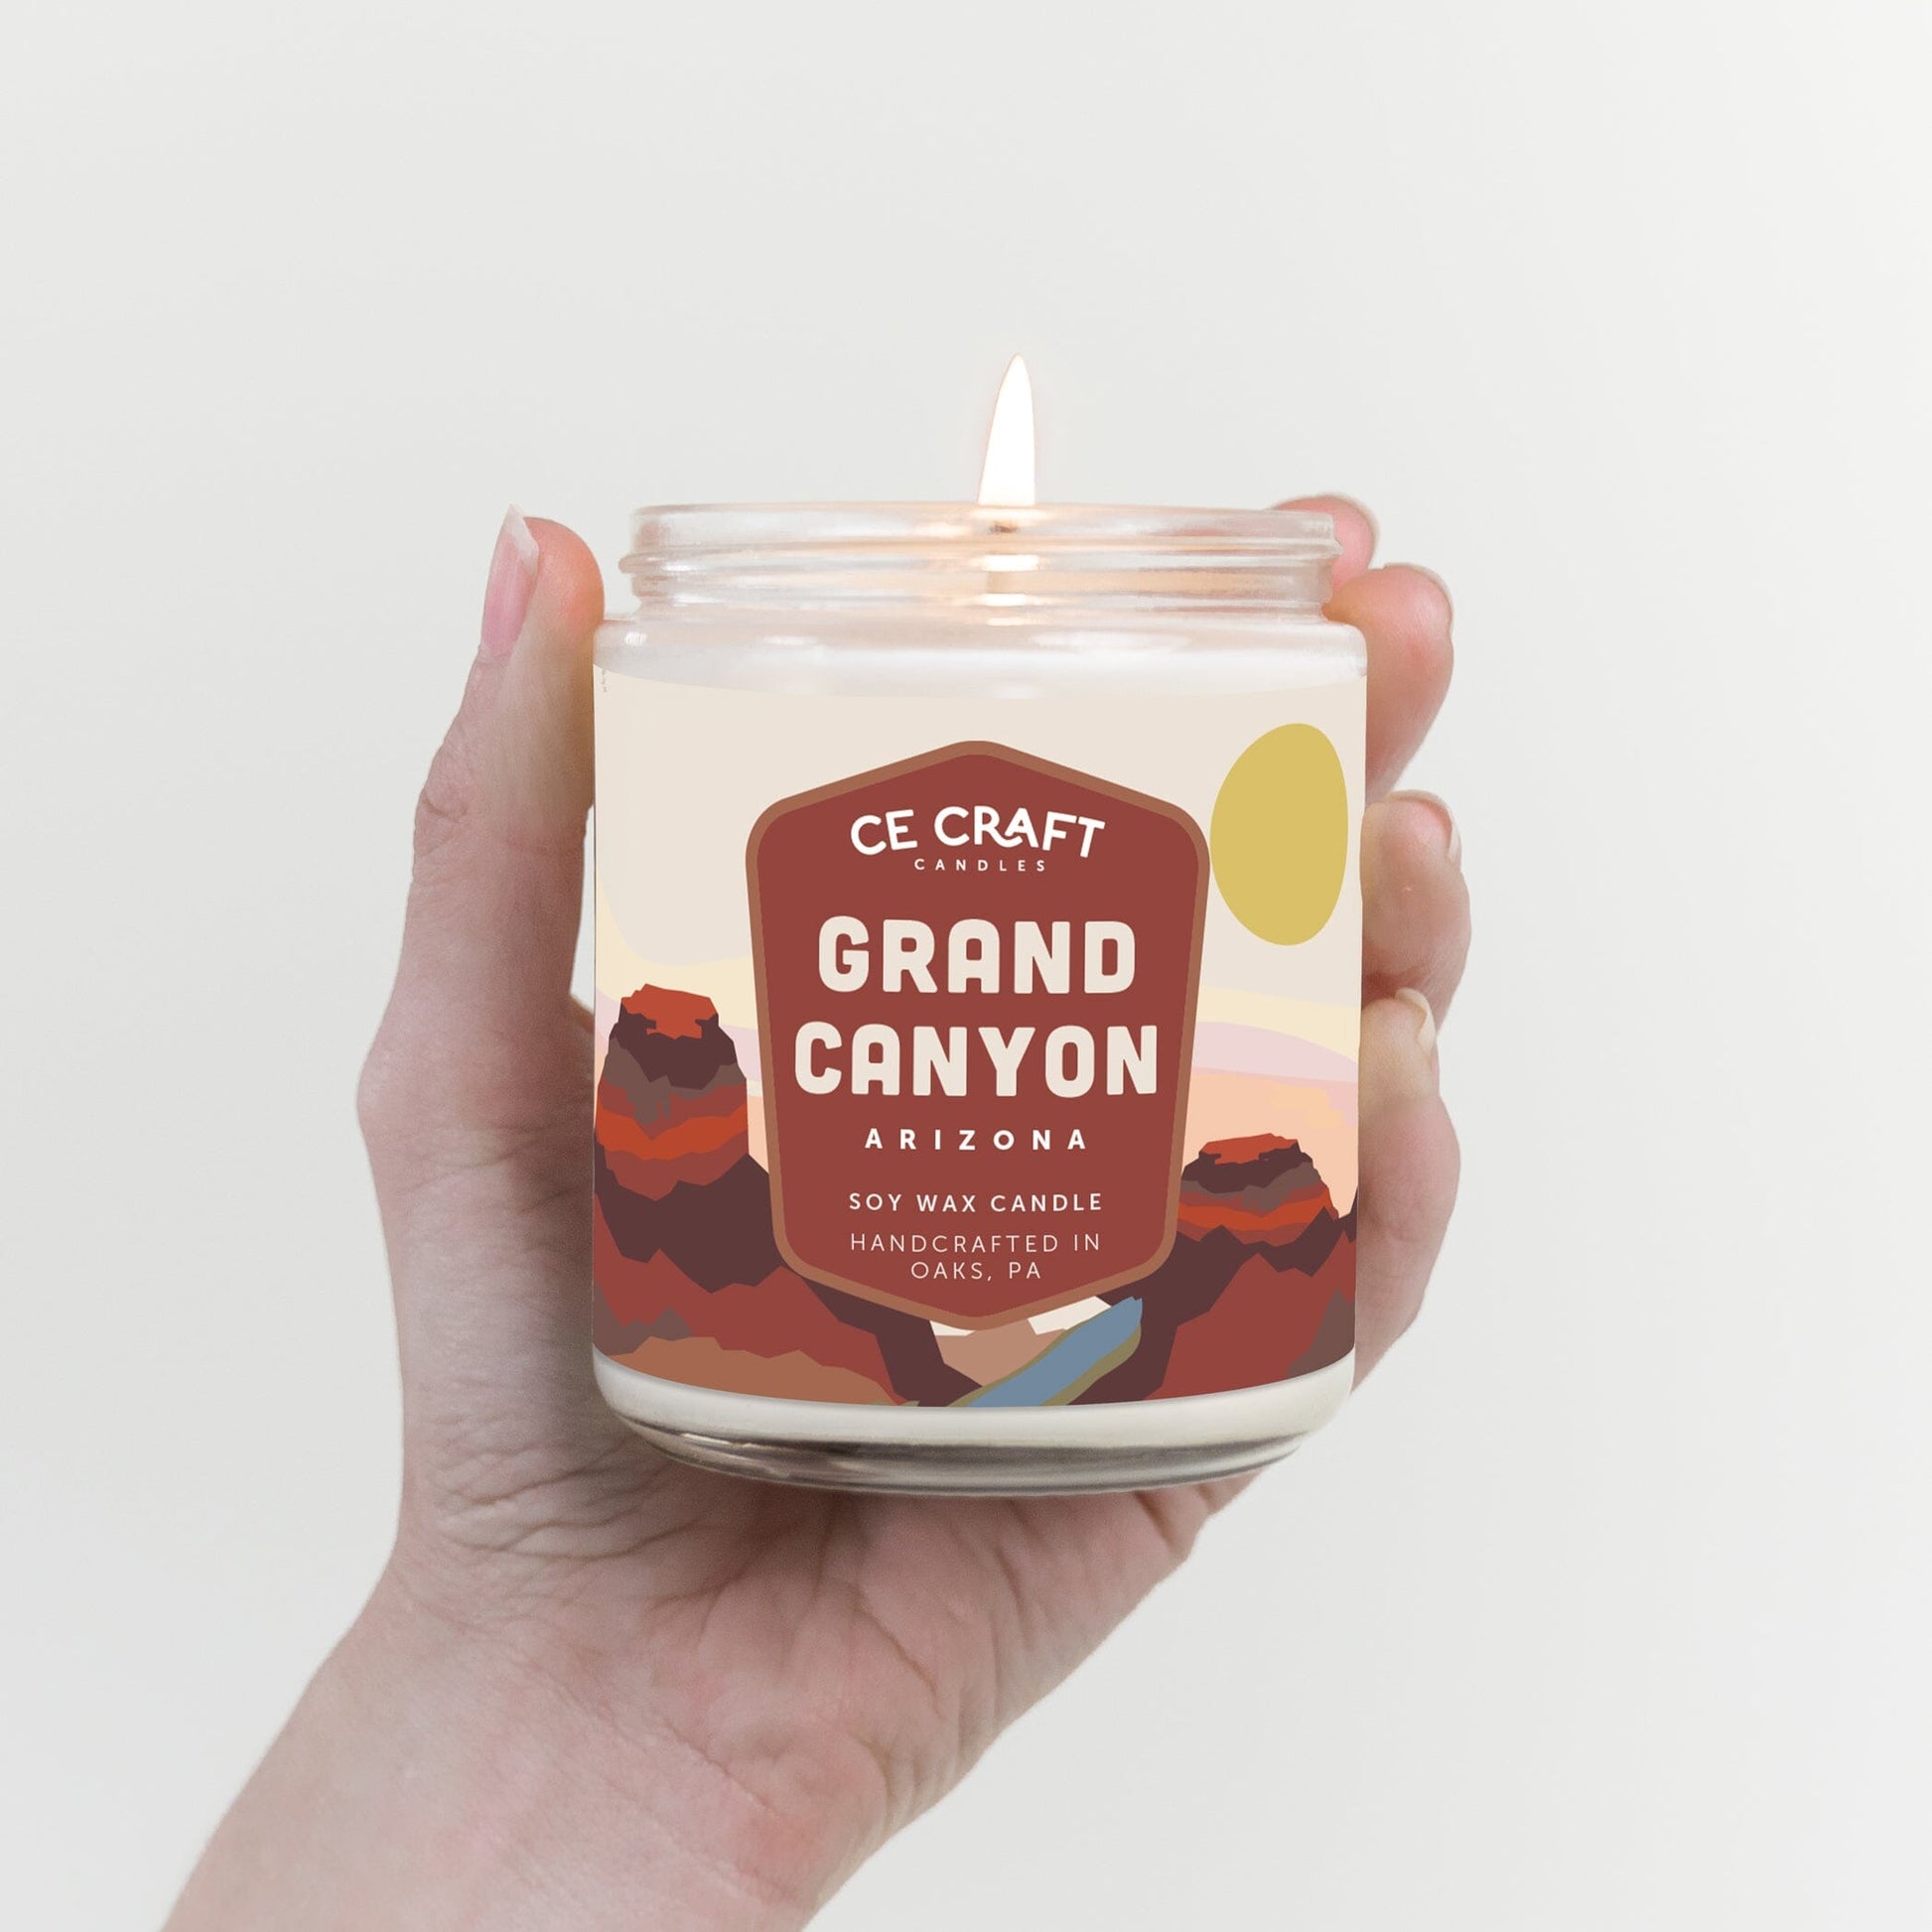 Grand Canyon National Park Candle Candles CE Craft 